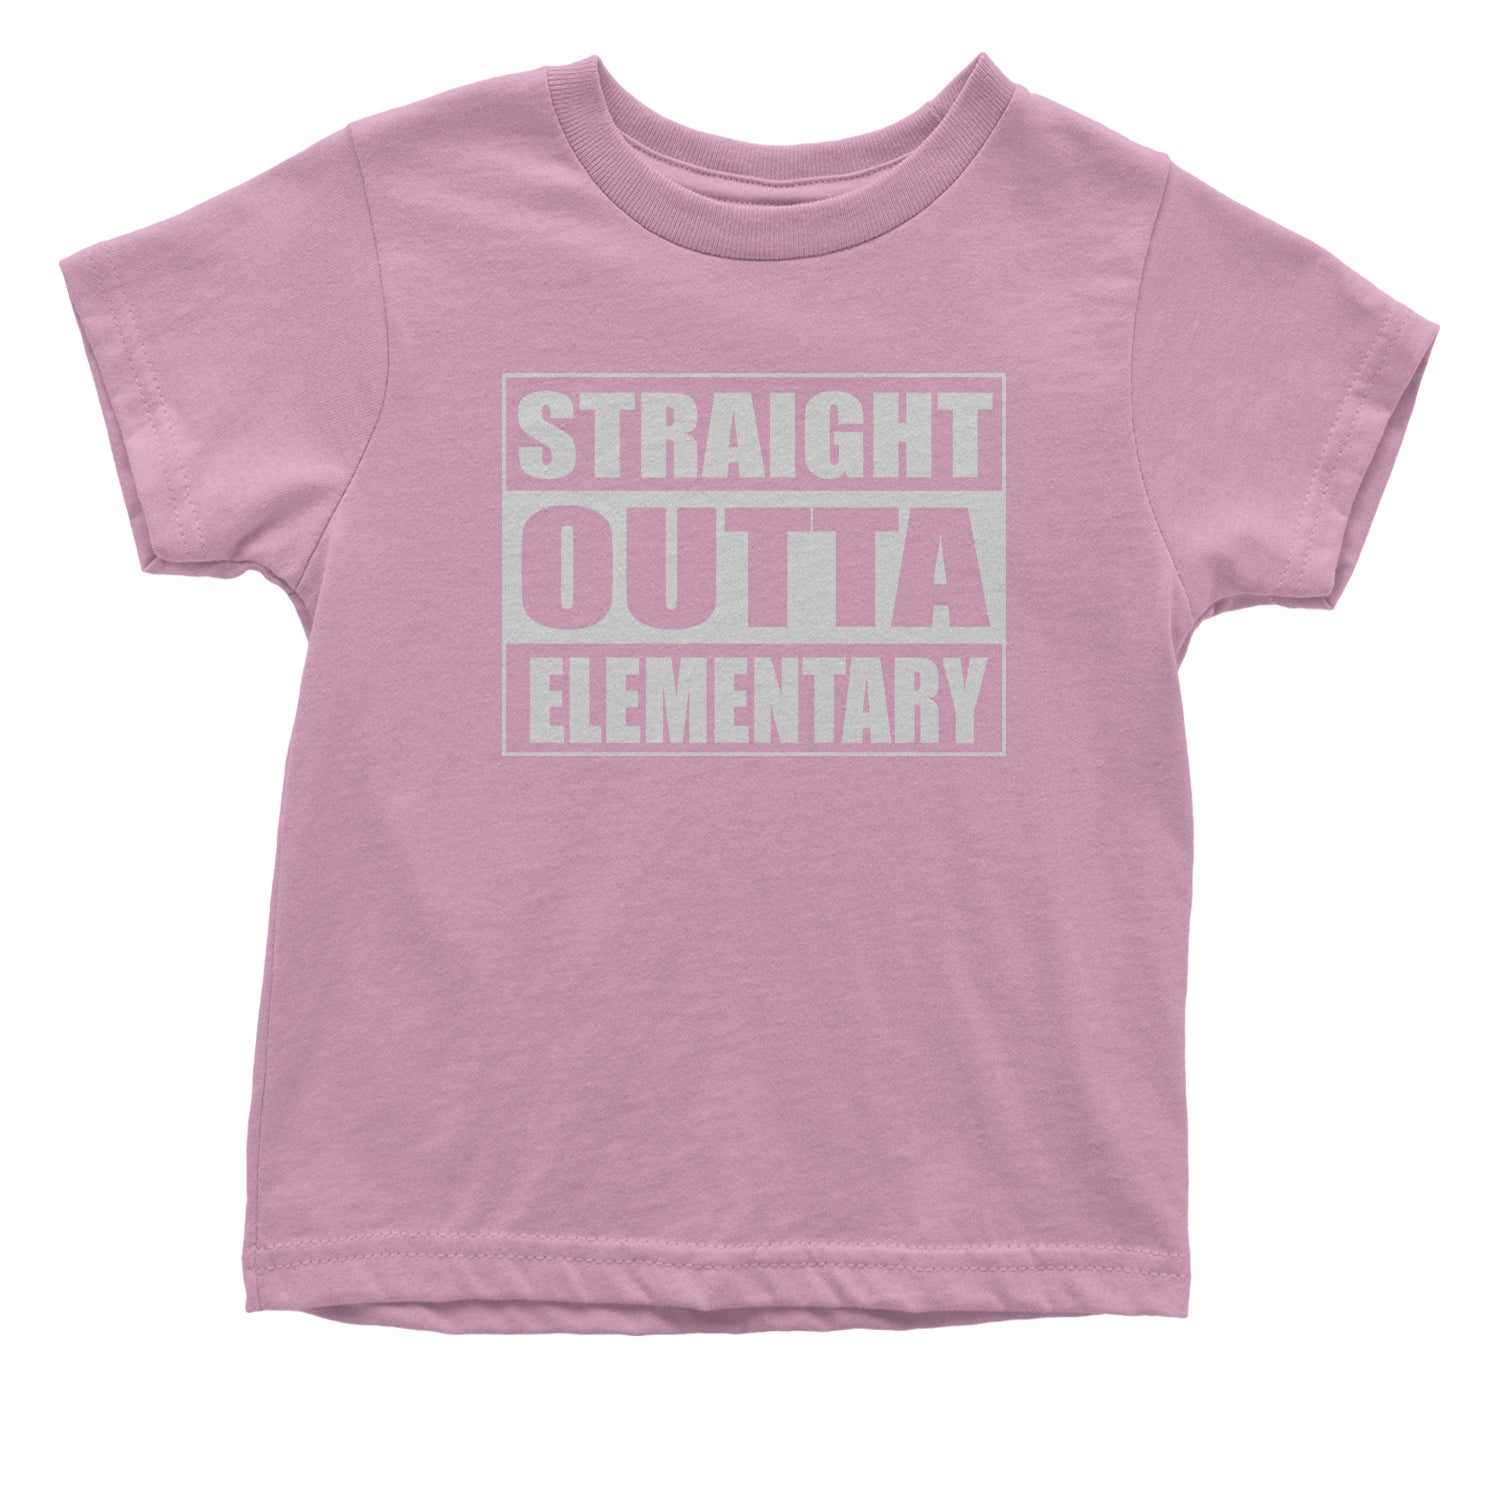 Straight Outta Elementary Toddler T-Shirt 2020, 2021, 2022, class, of, quarantine, queen by Expression Tees